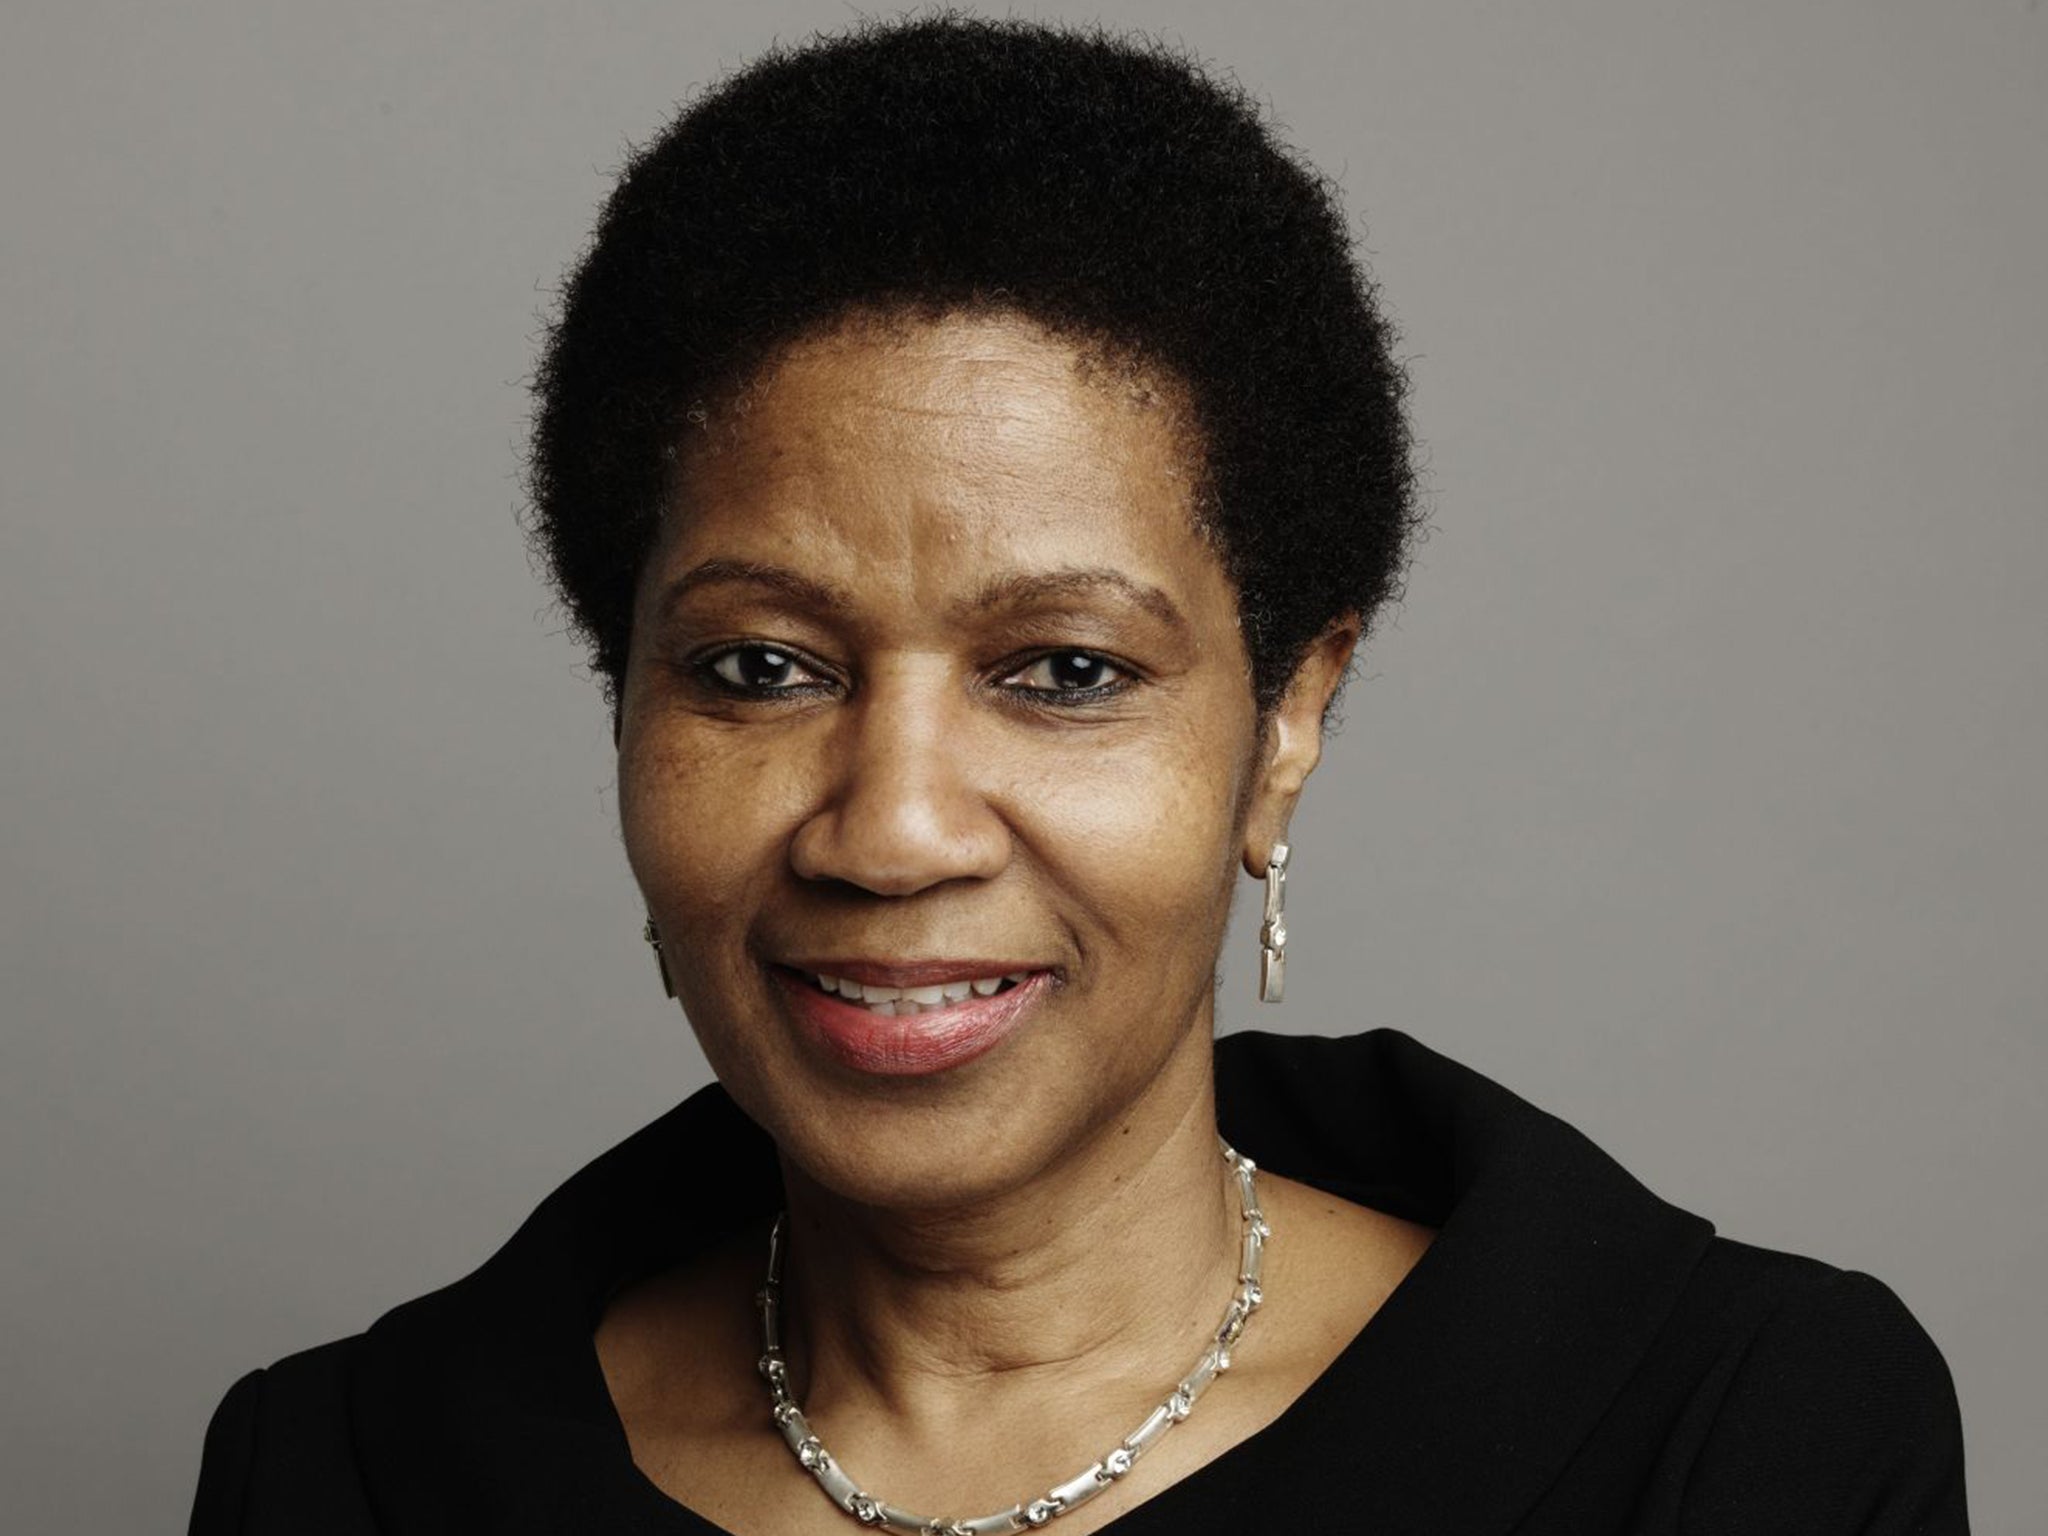 Phumzile Mlambo-Ngcuka is the head of UN Women and former deputy president of South Africa